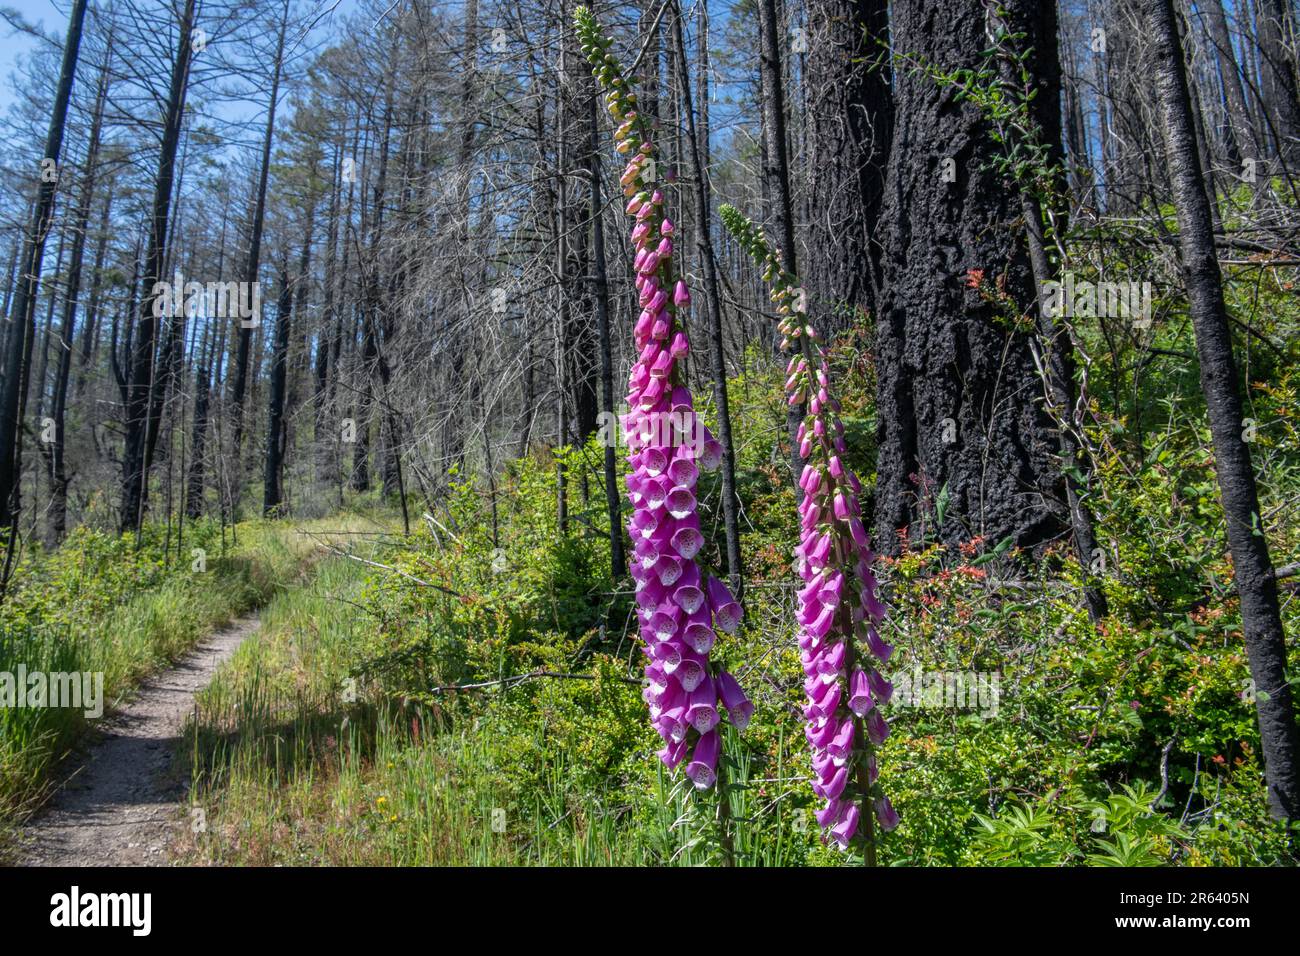 Digitalis purpurea, foxglove, an introduced plant flowering and growing in Point Reyes national seashore after the woodward fire passed through. Stock Photo